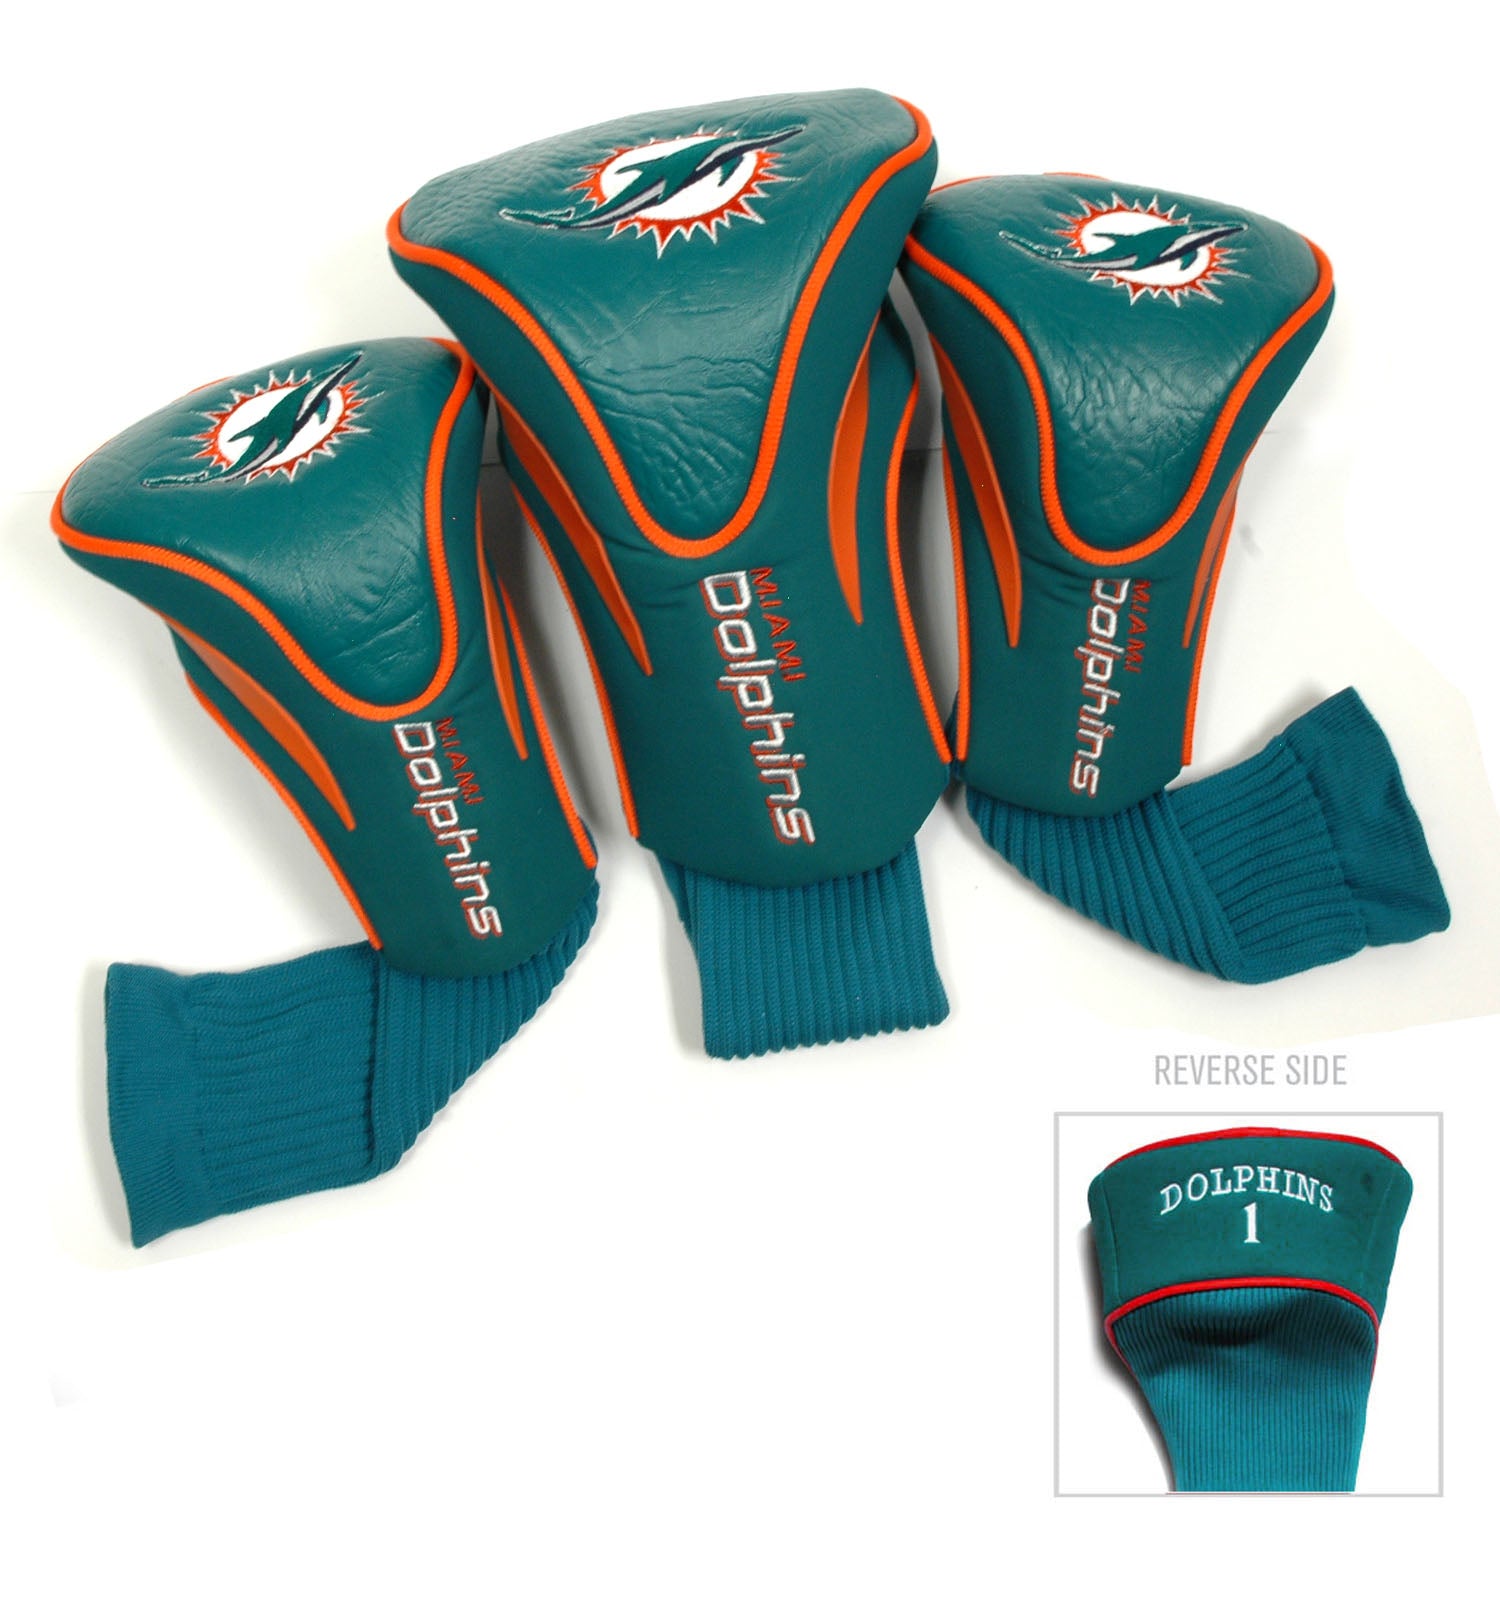 Miami Dolphins 3 Pack Contour Sock Headcovers